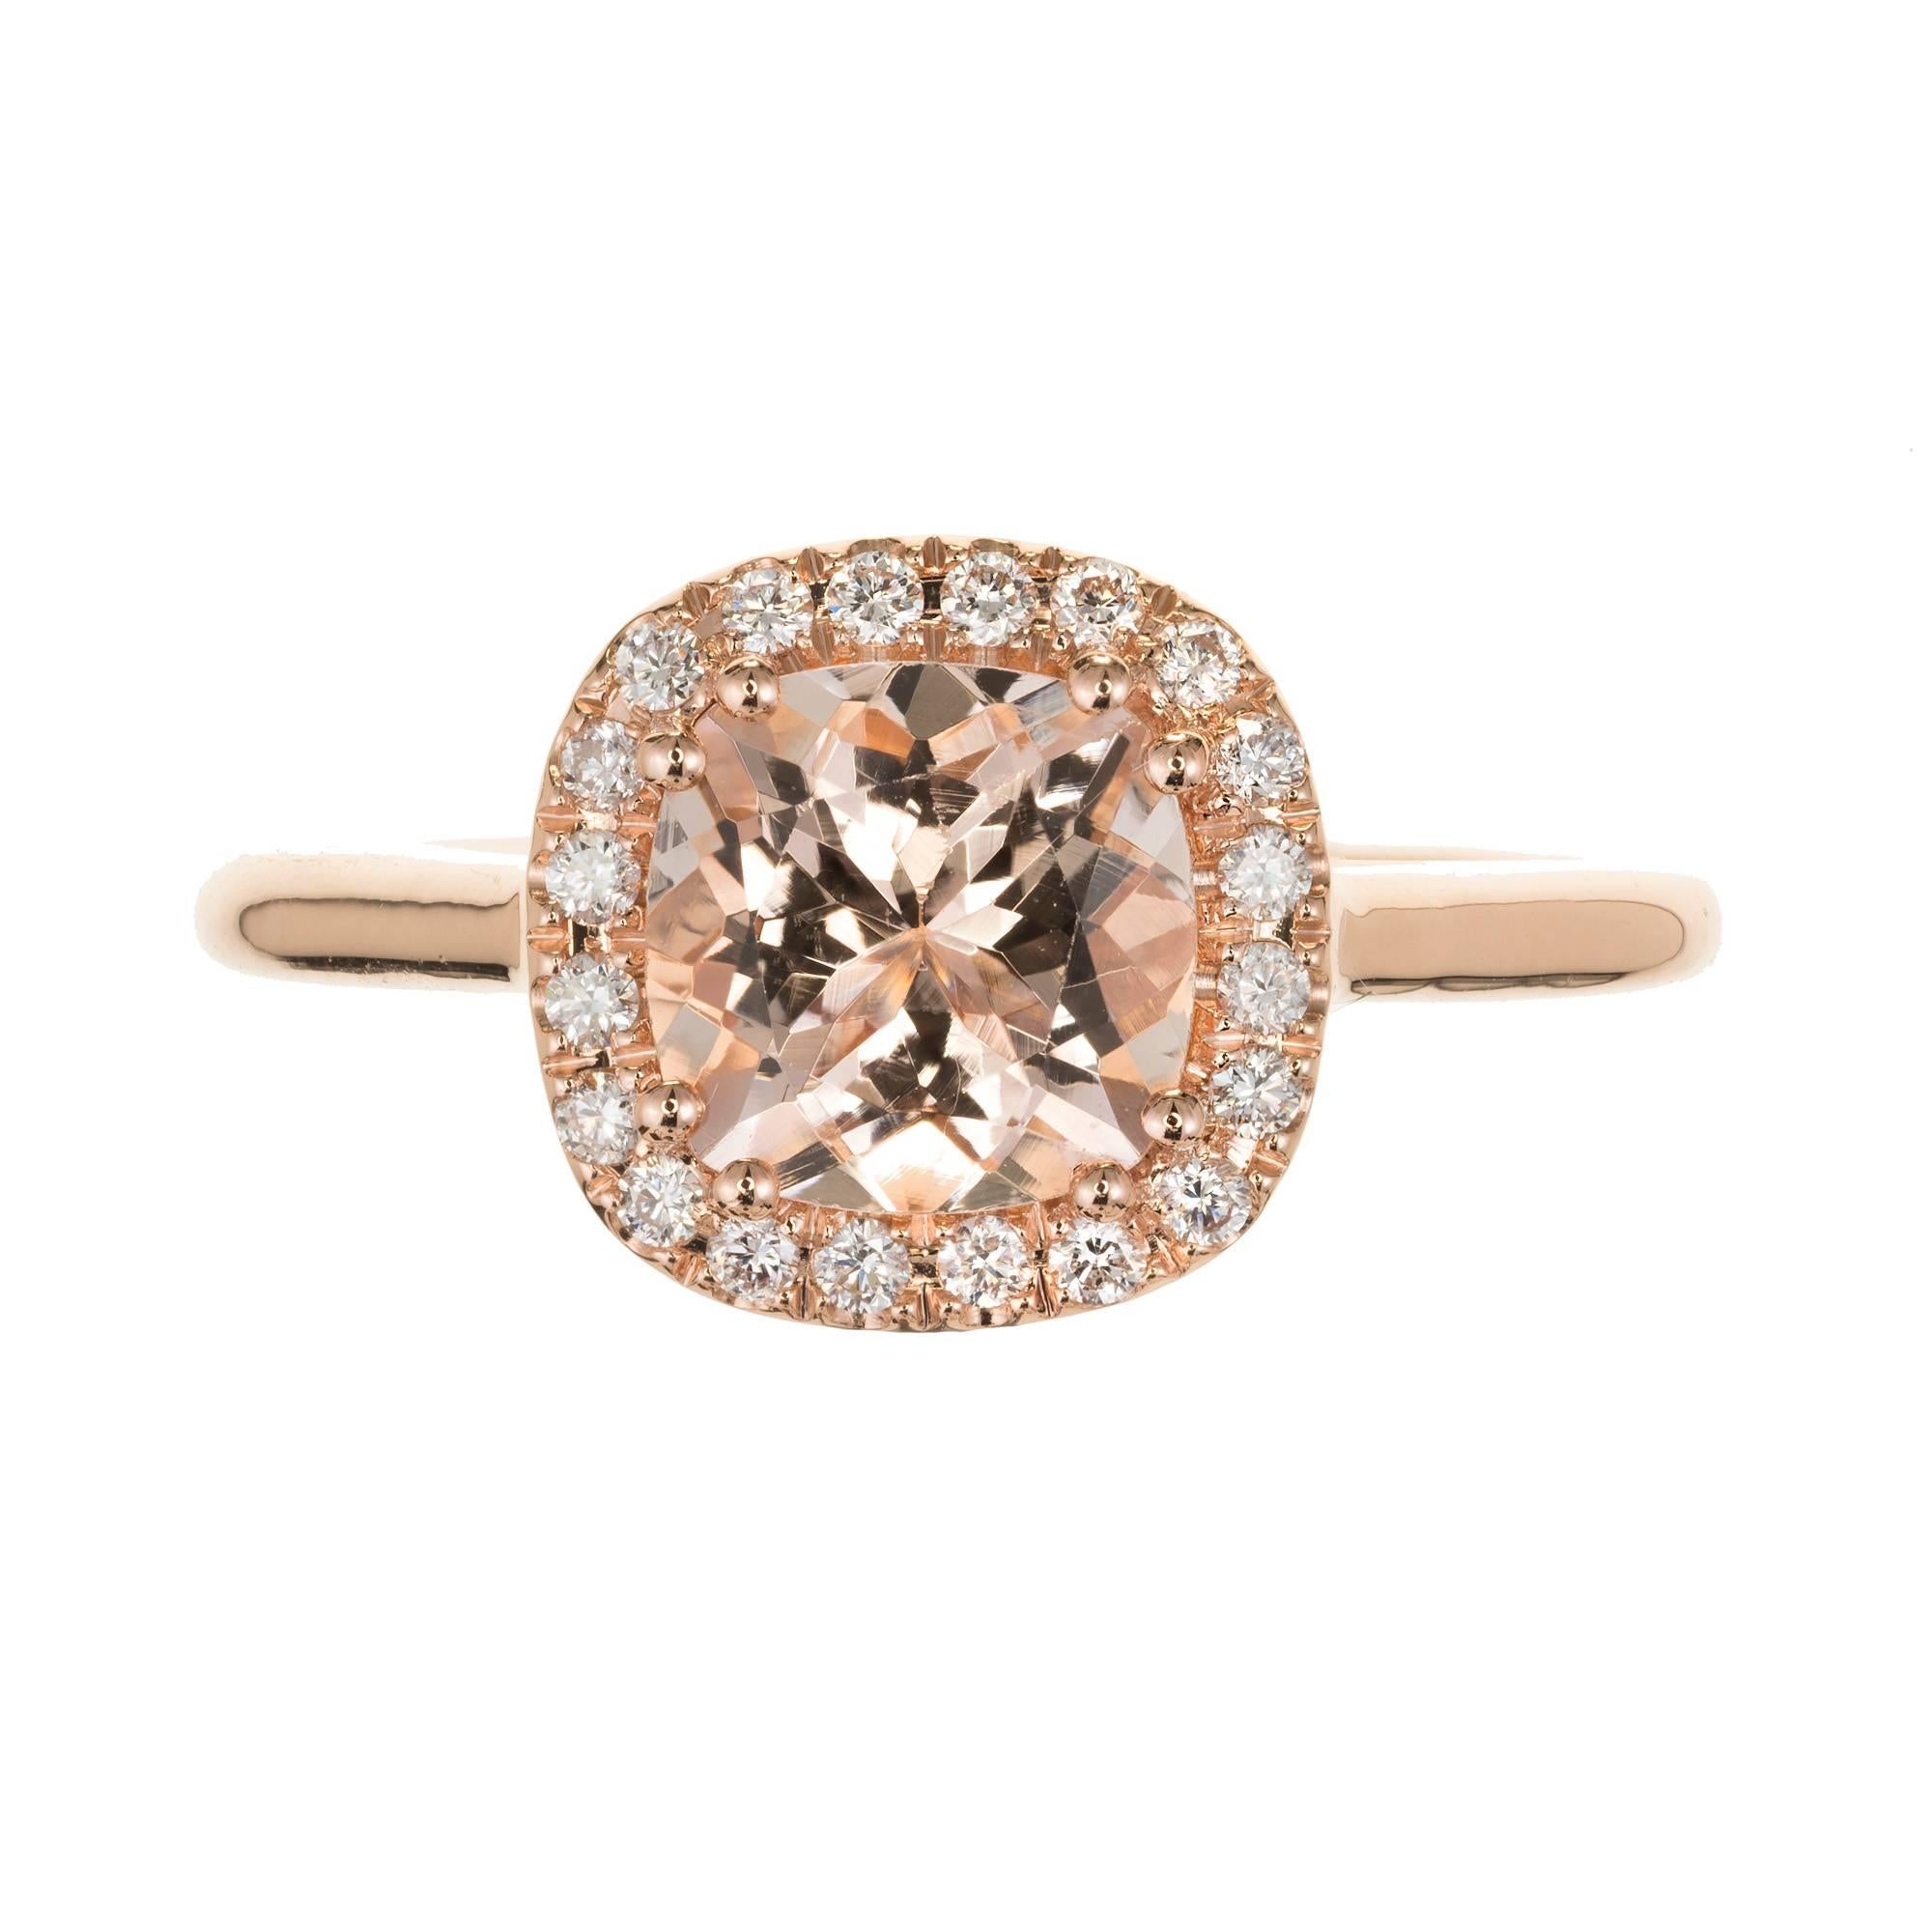 Peter Suchy cushion Morganite diamond halo engagement ring in 14k rose gold setting.

14k rose gold
1 cushion soft pink Morganite, approx. total weight 1.28cts, VS
20 round full cut Diamonds, approx. total weight .14cts, VS
Size 6.5 and